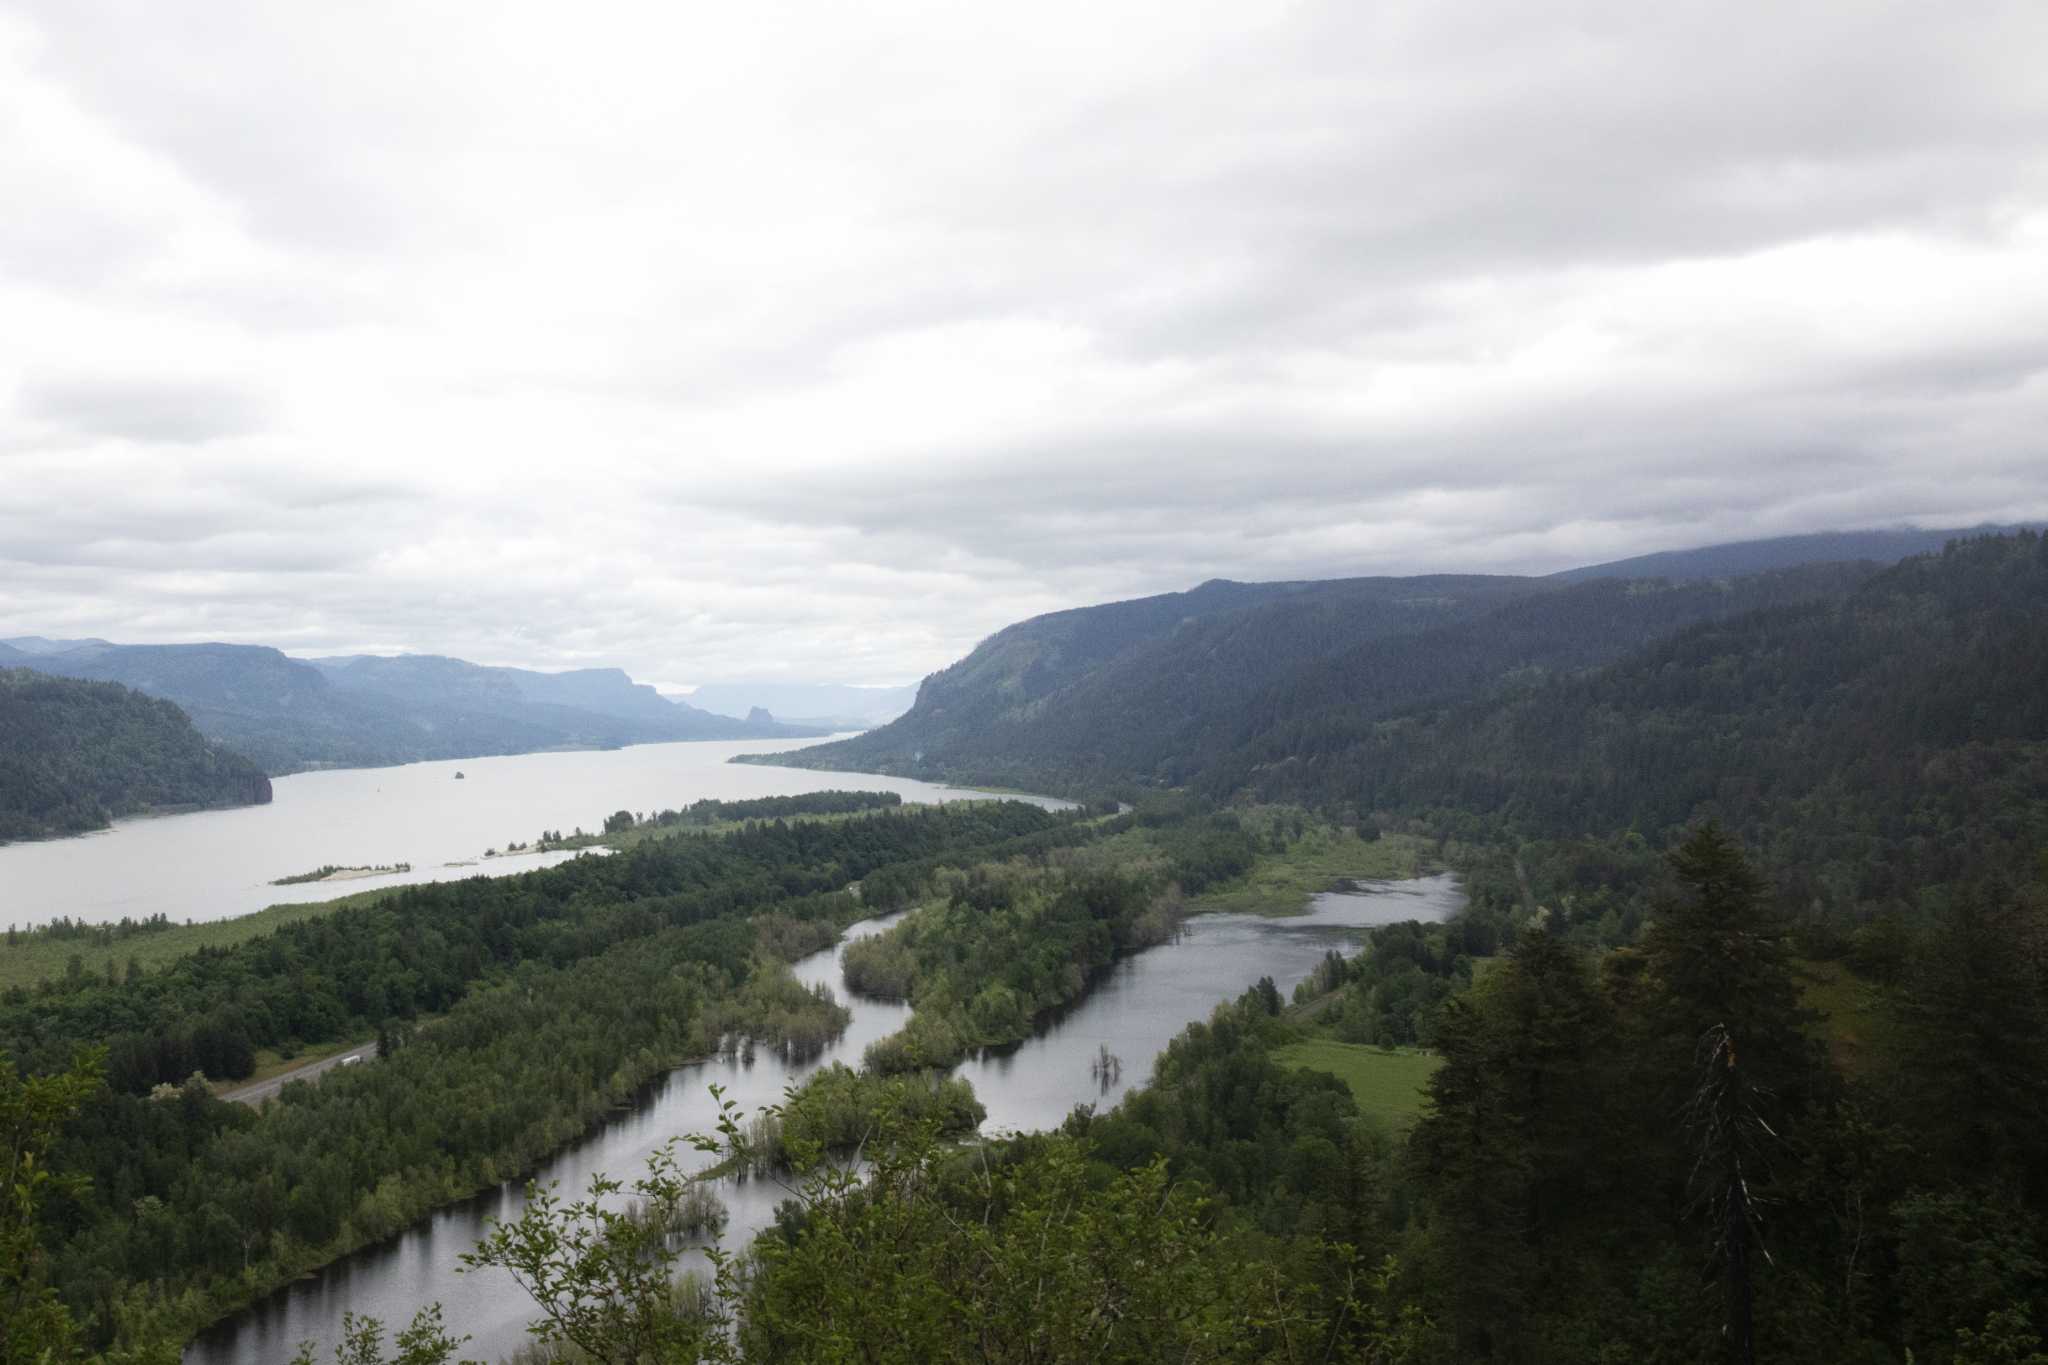 Hiker dies after falling from trail in Oregon's Columbia River Gorge, officials say